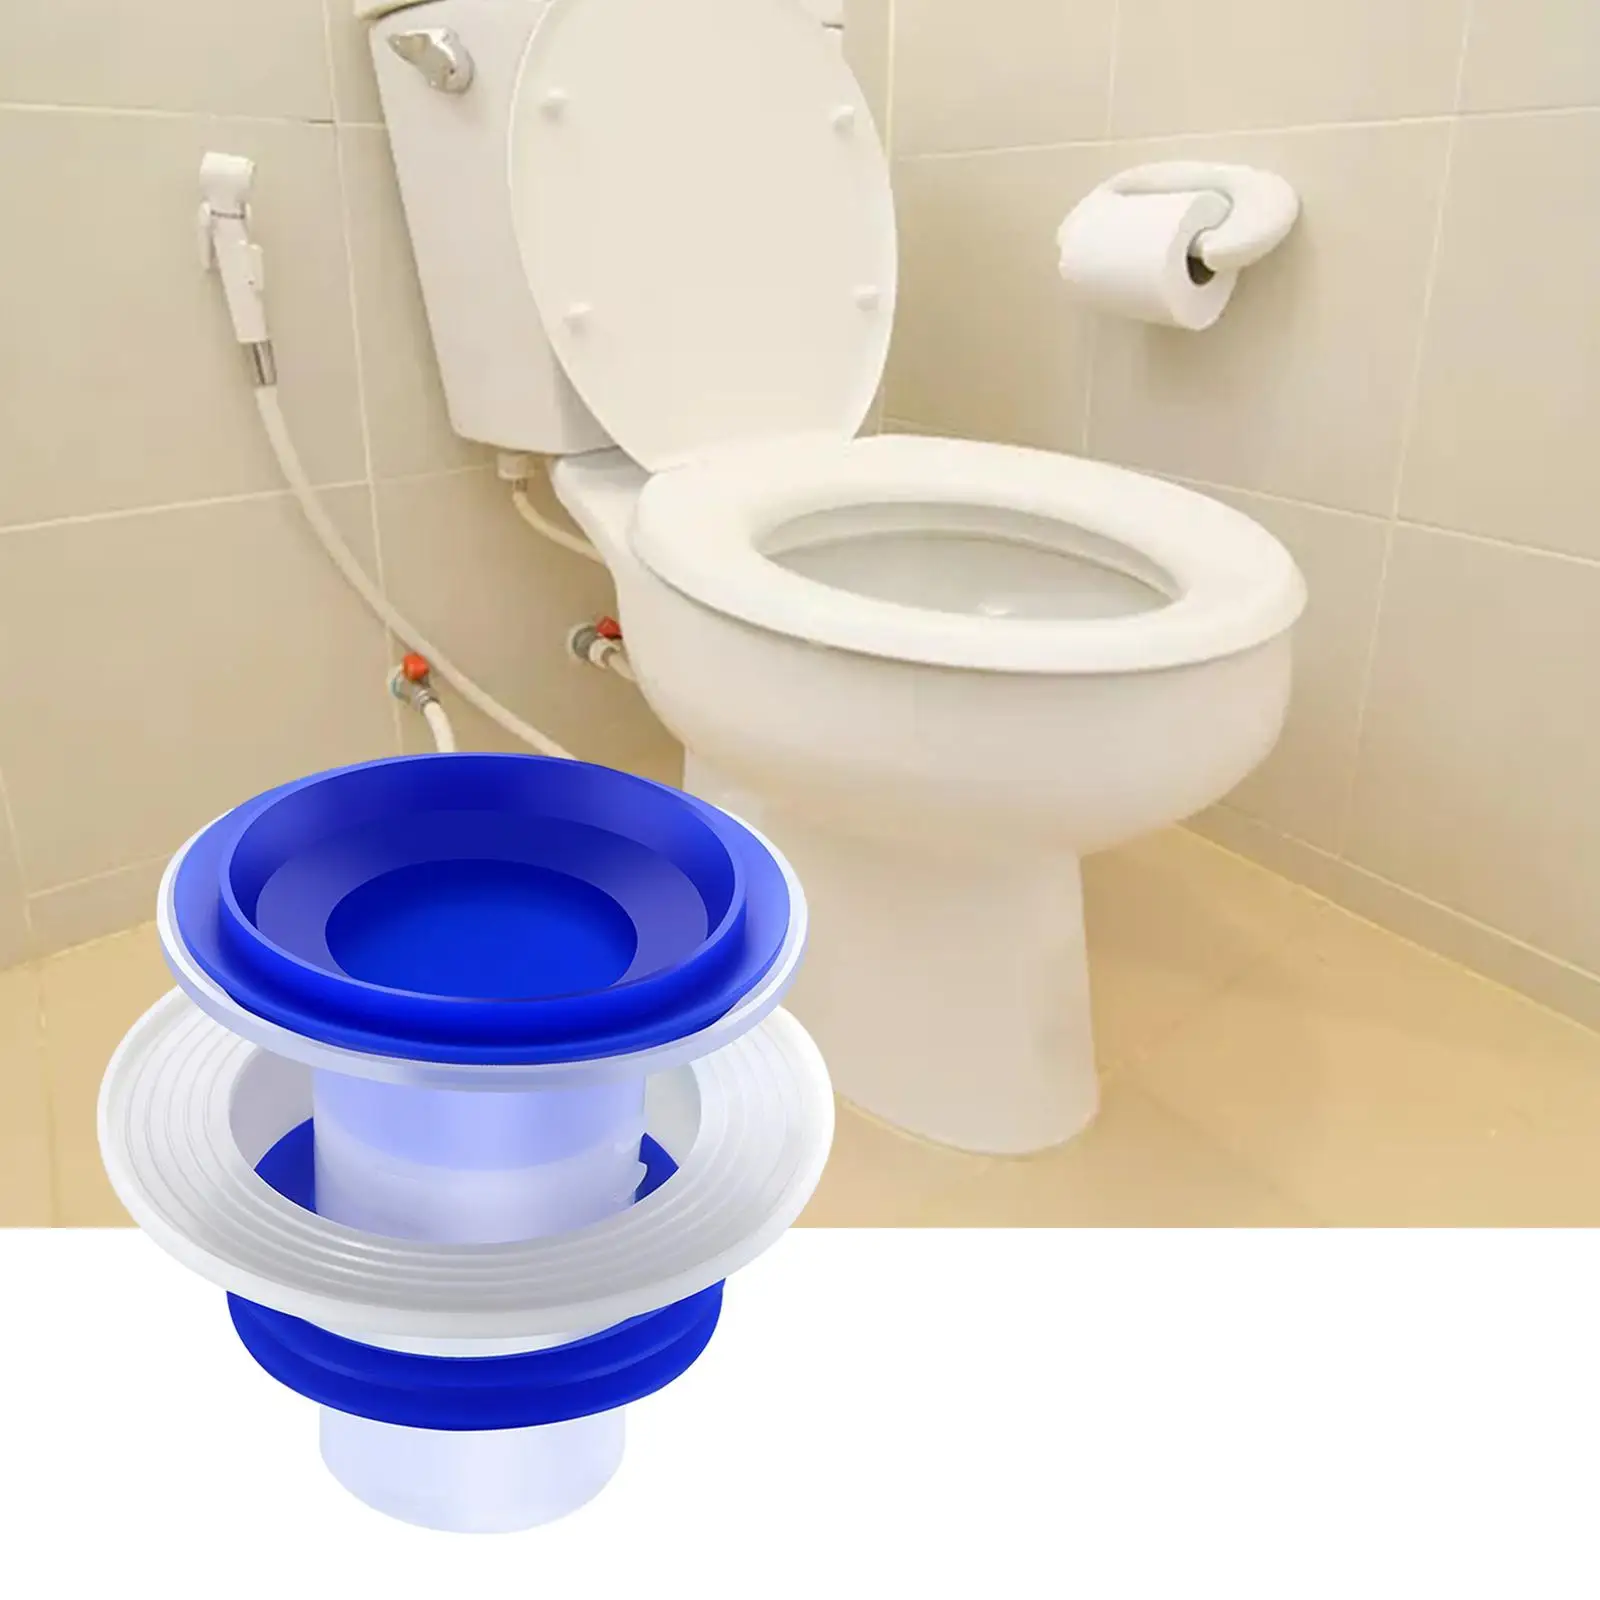 Flange Seal Washer Ring Toilet Pan Odor Prevent Plug Stopping Odor Plug Thickened Easy Install Odor Blocking Device for Hotel